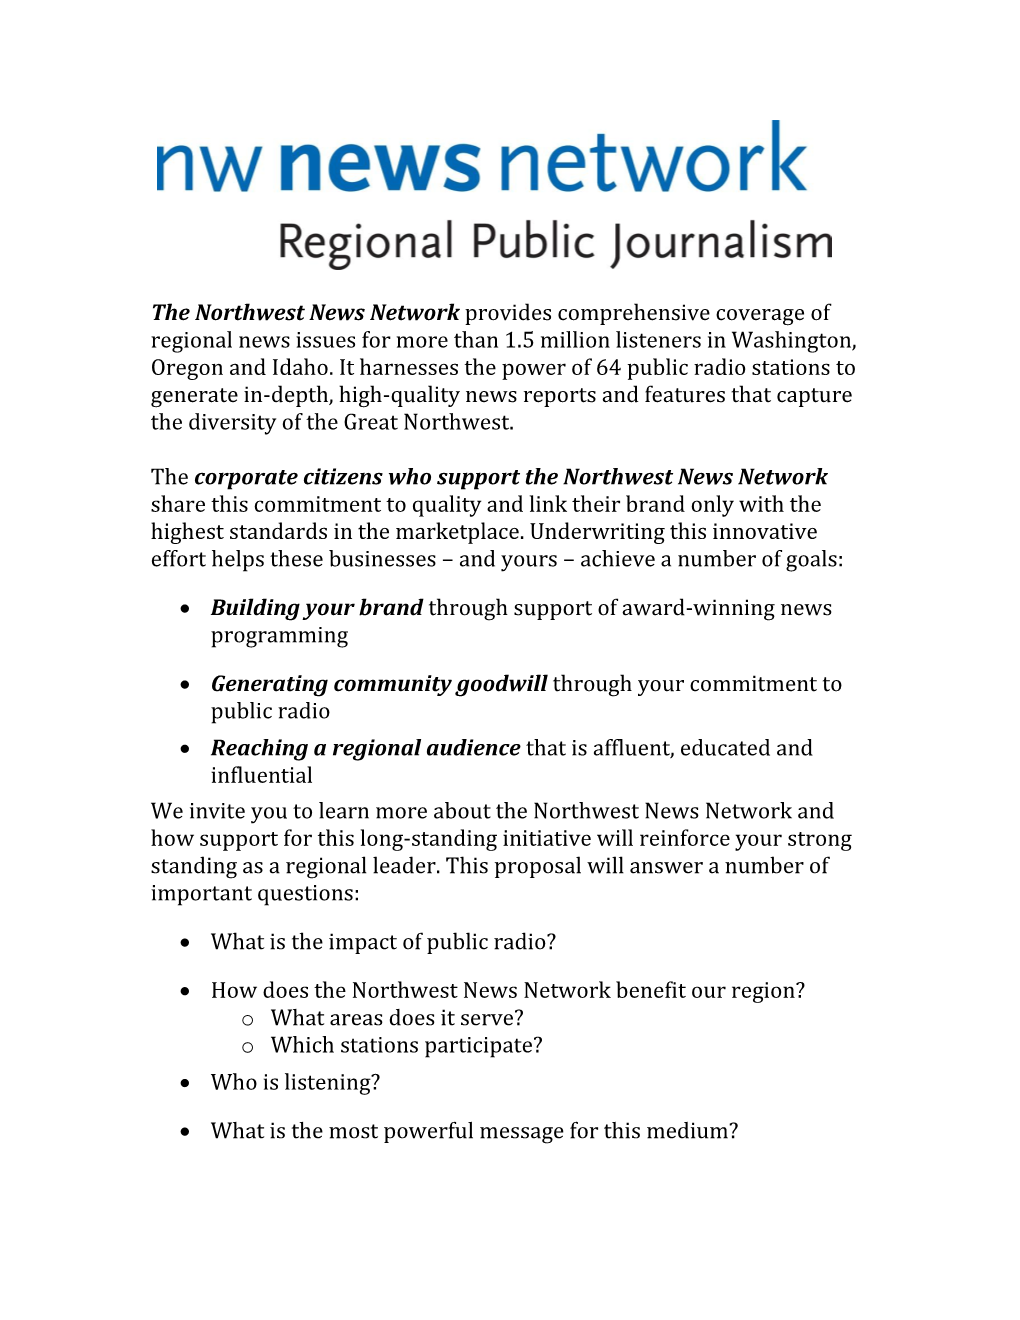 The Northwest News Network Provides Comprehensive Coverage of Regional News Issues for More Than 1.5 Million Listeners in Washington, Oregon and Idaho